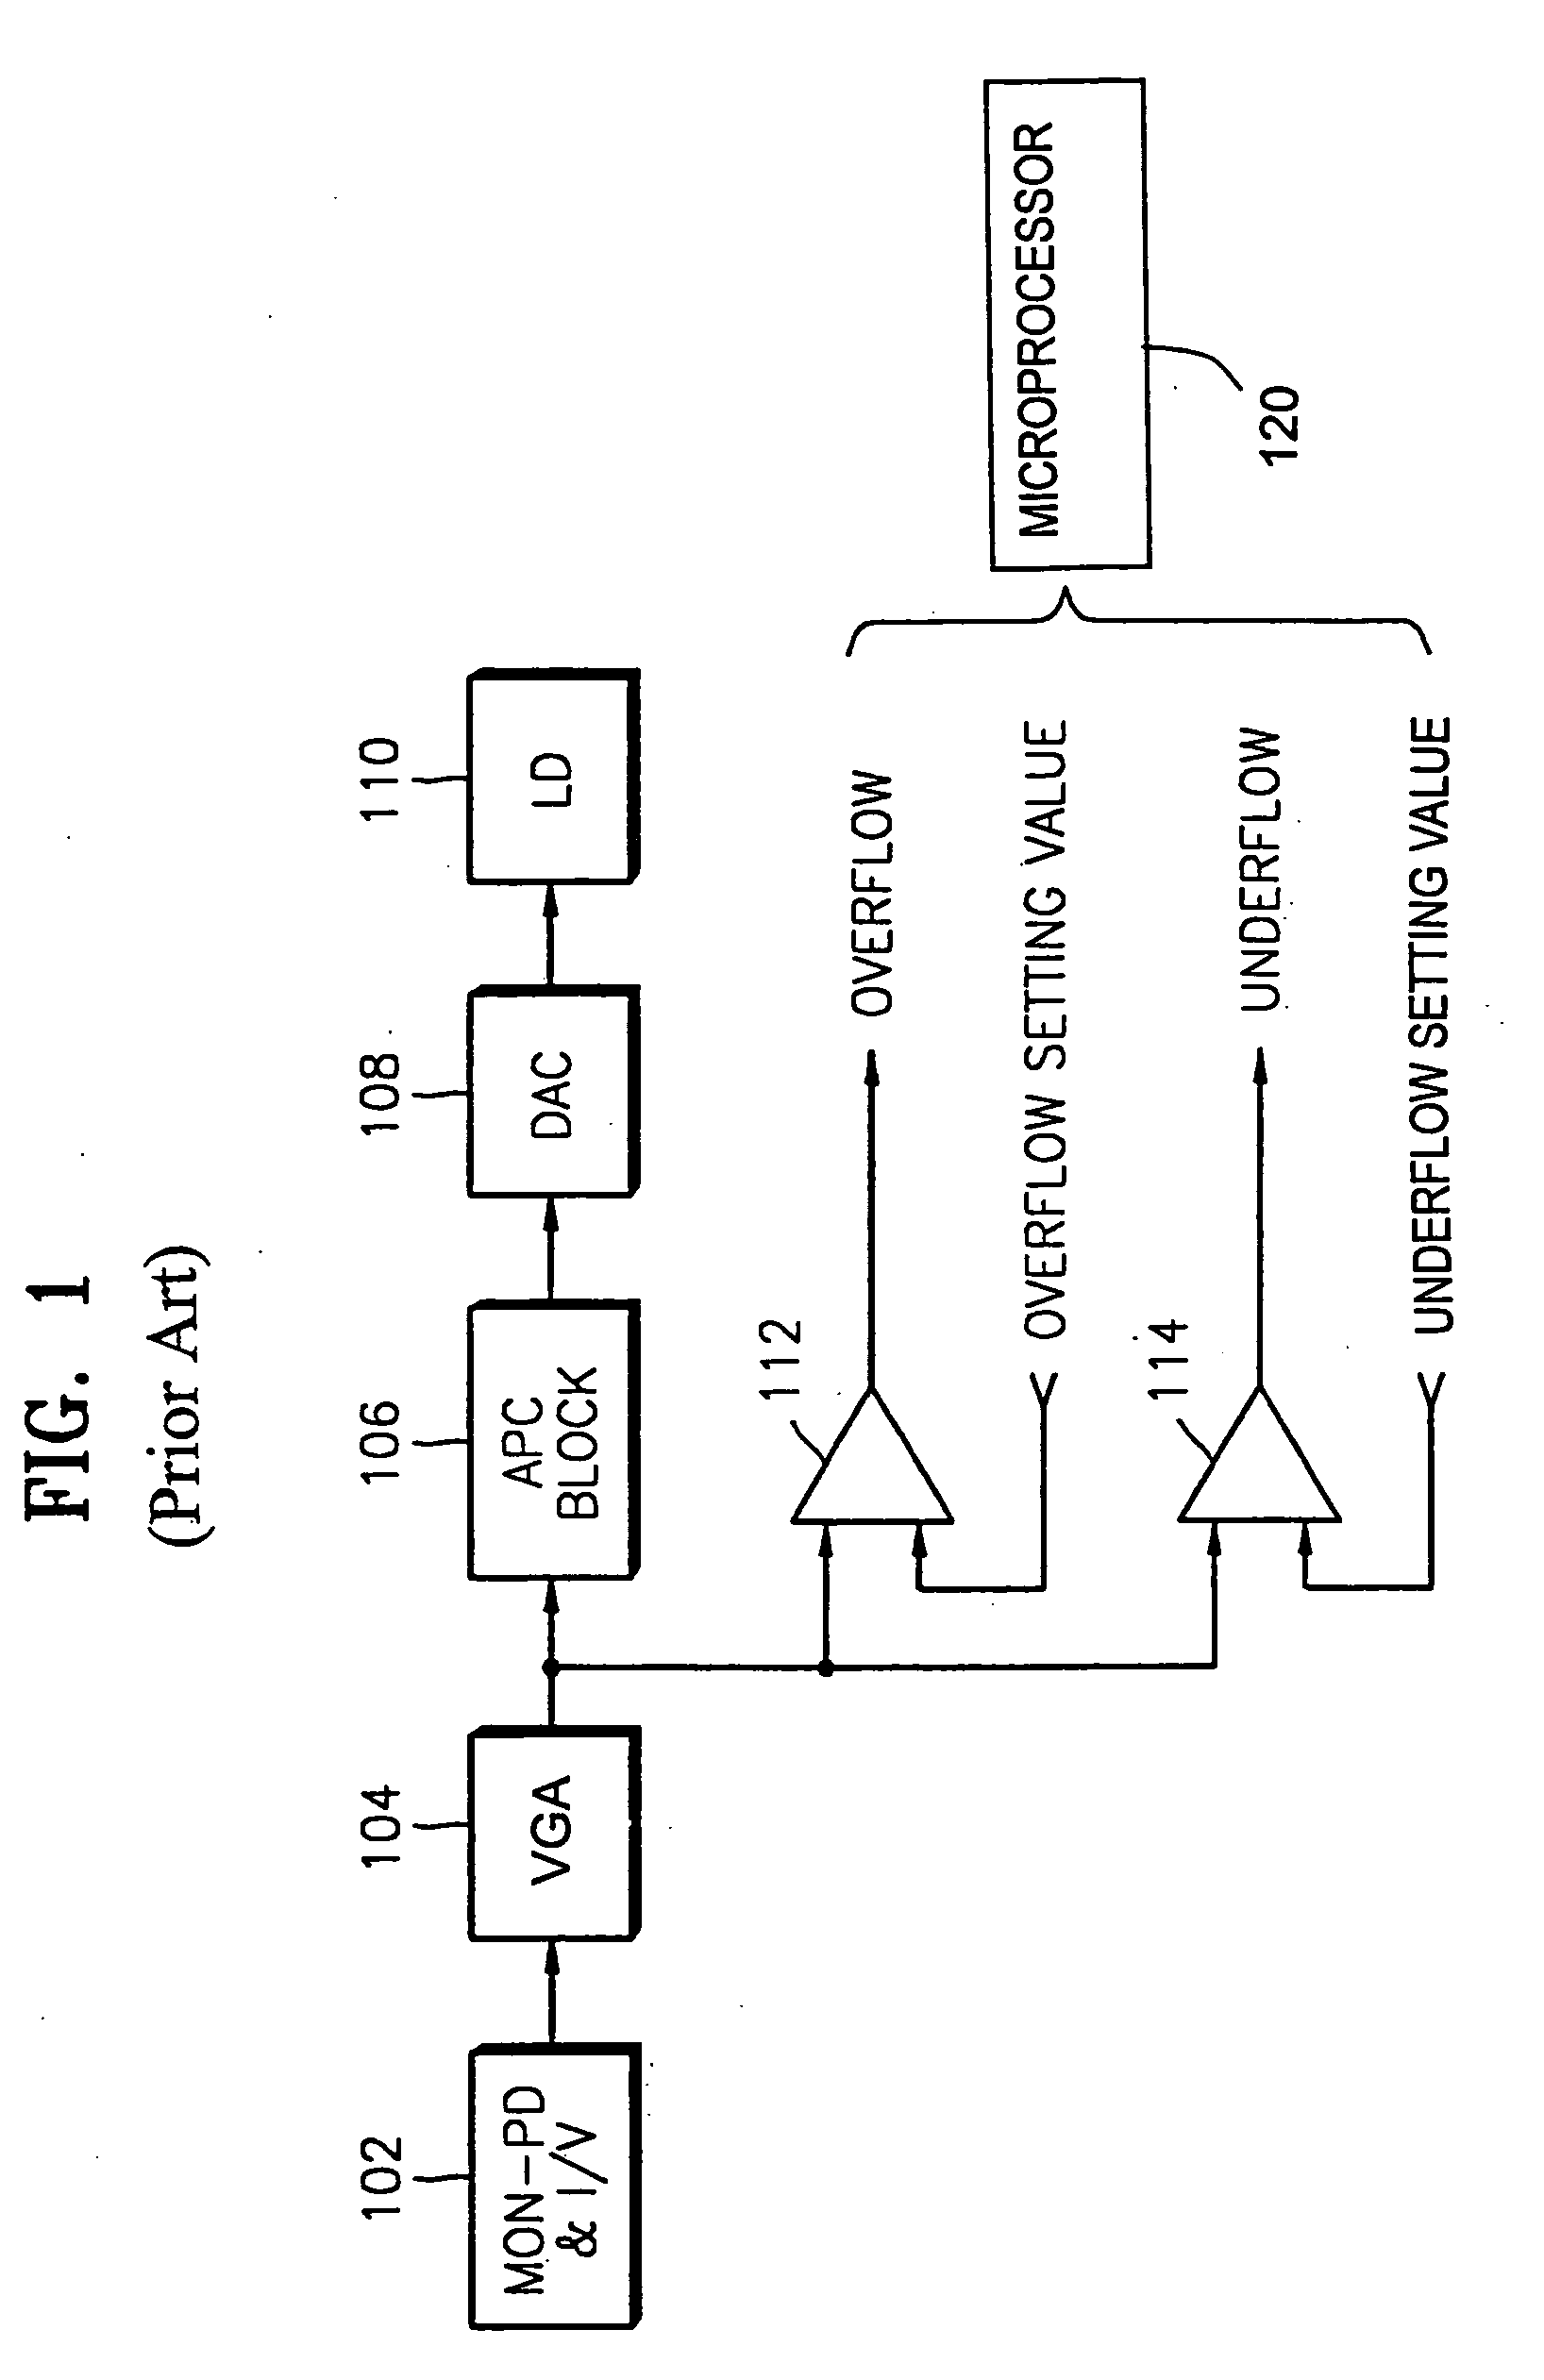 Apparatus for detecting abnormal states of laser diode power in an optical disc recording/reproducing device